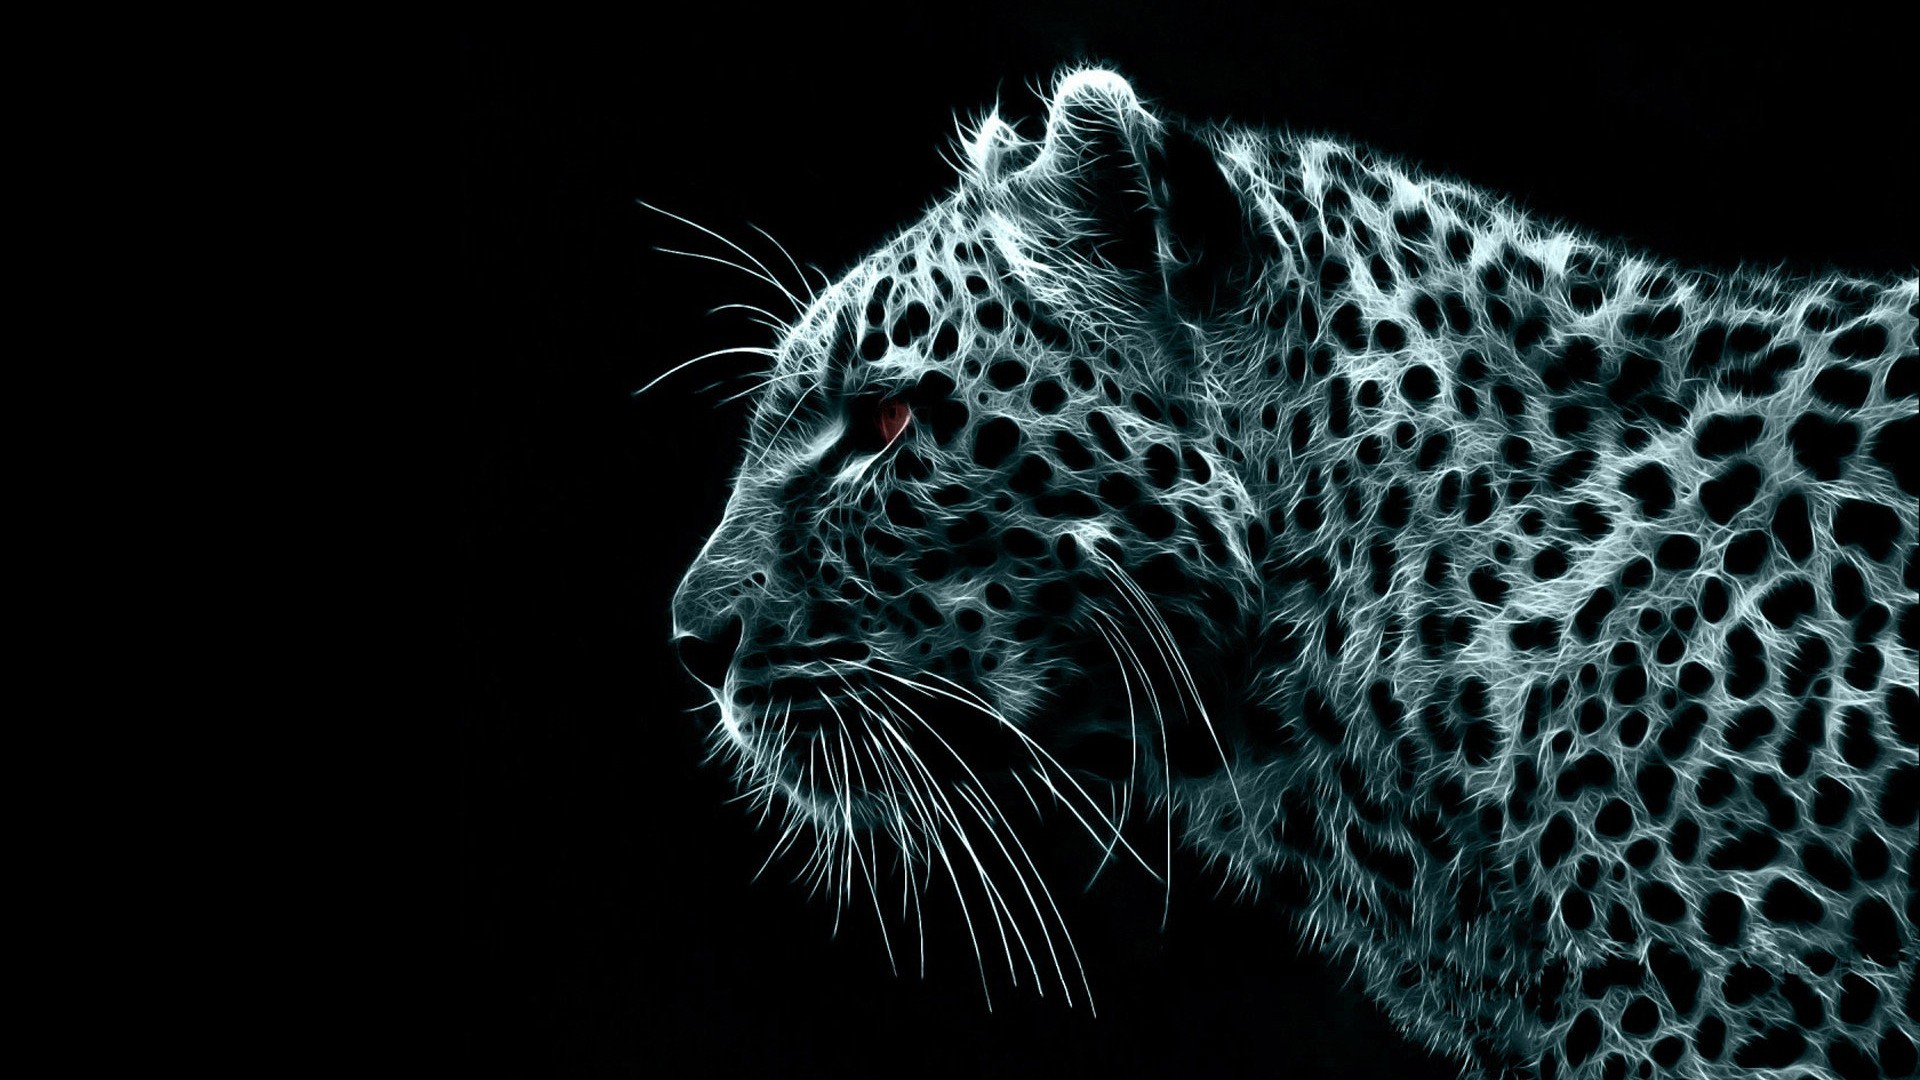 Get Wallpaper Leopard Desktop And Make This For Your